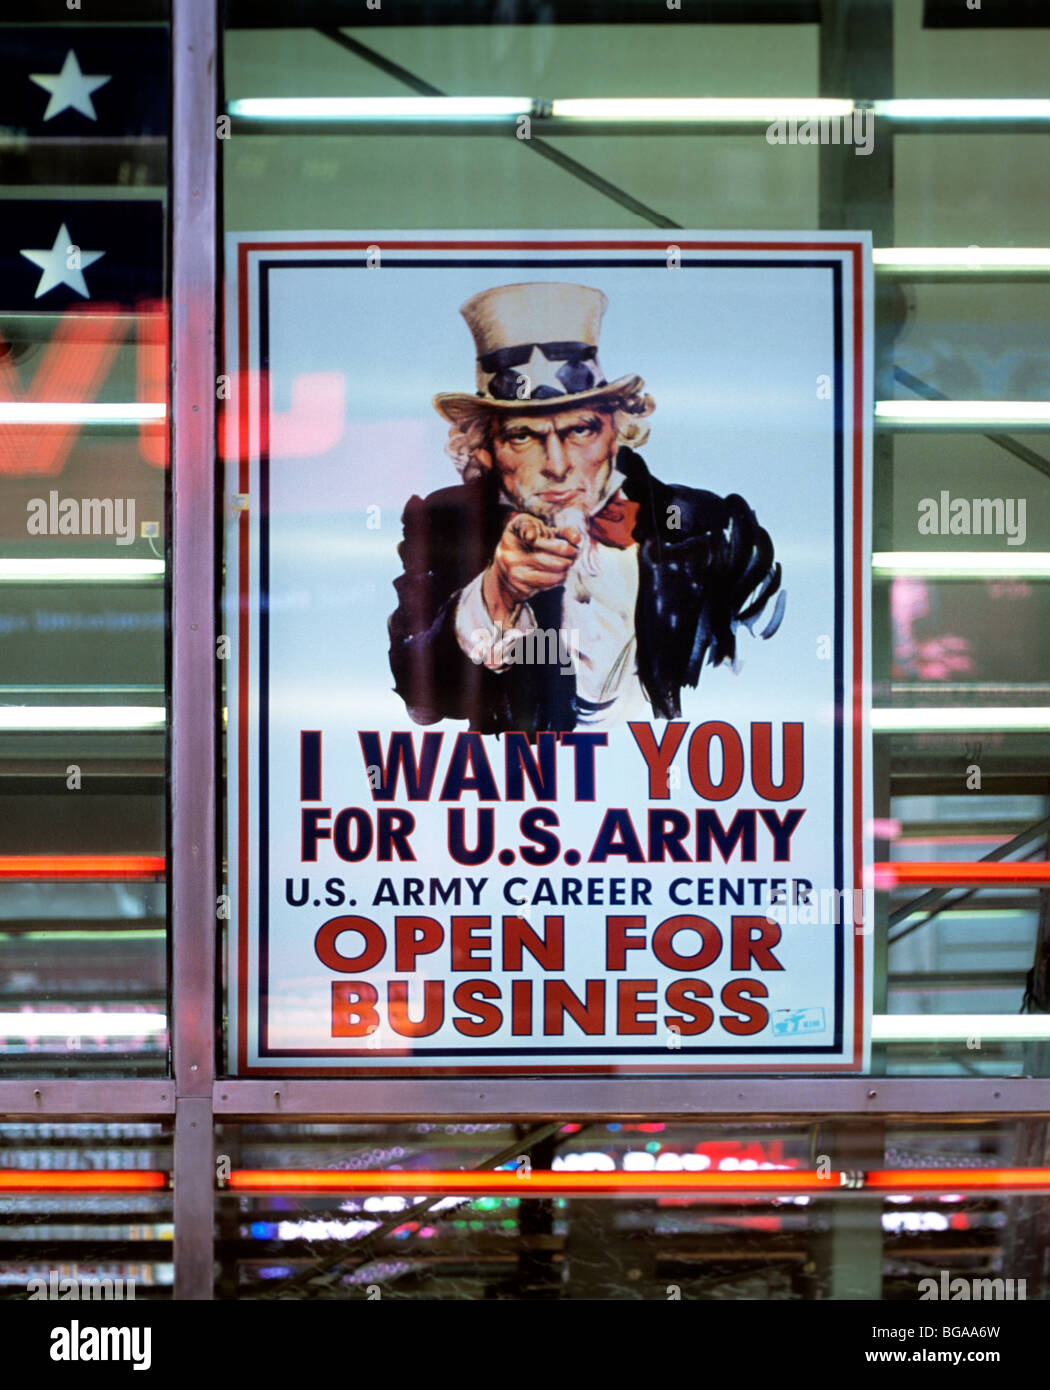 'I want you for U.S. Army' recruiting poster, US Army career centre, Times Square, New York City. Stock Photo